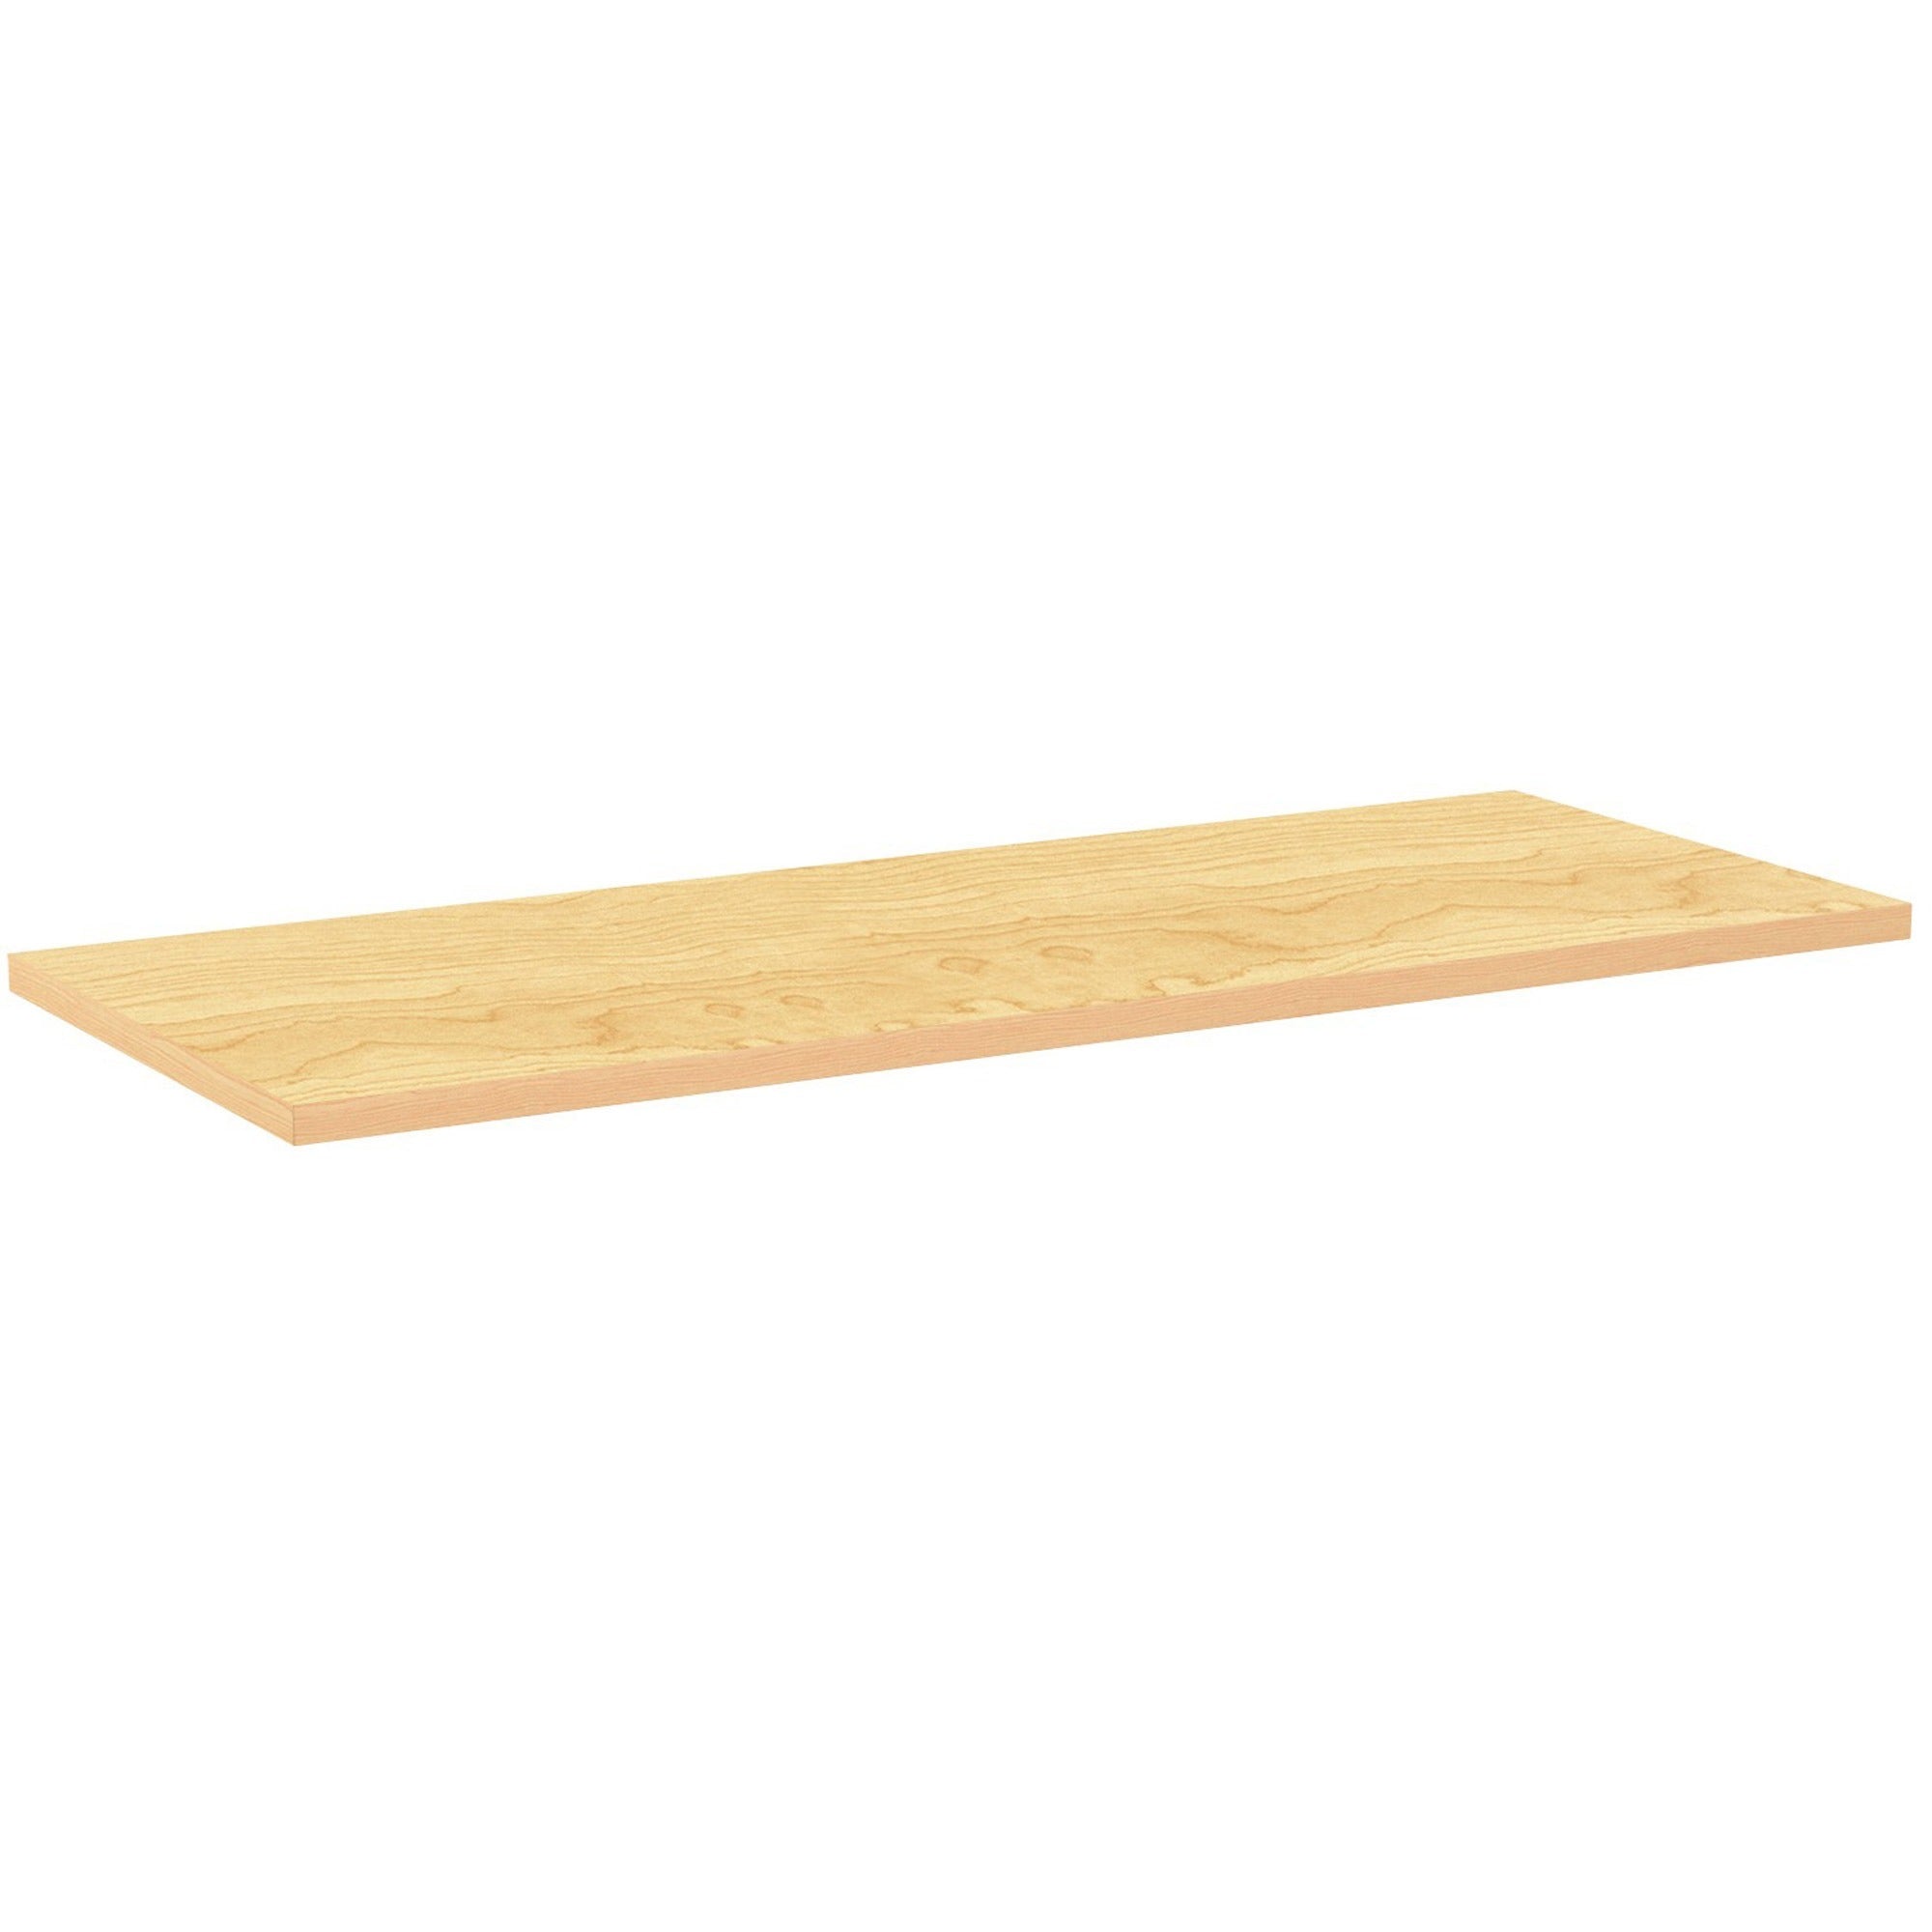 special-t-low-pressure-laminate-tabletop-for-table-topcrema-maple-rectangle-top-24-table-top-length-x-60-table-top-width-low-pressure-laminate-lpl-top-material-1-each_sctsp2460cm - 1